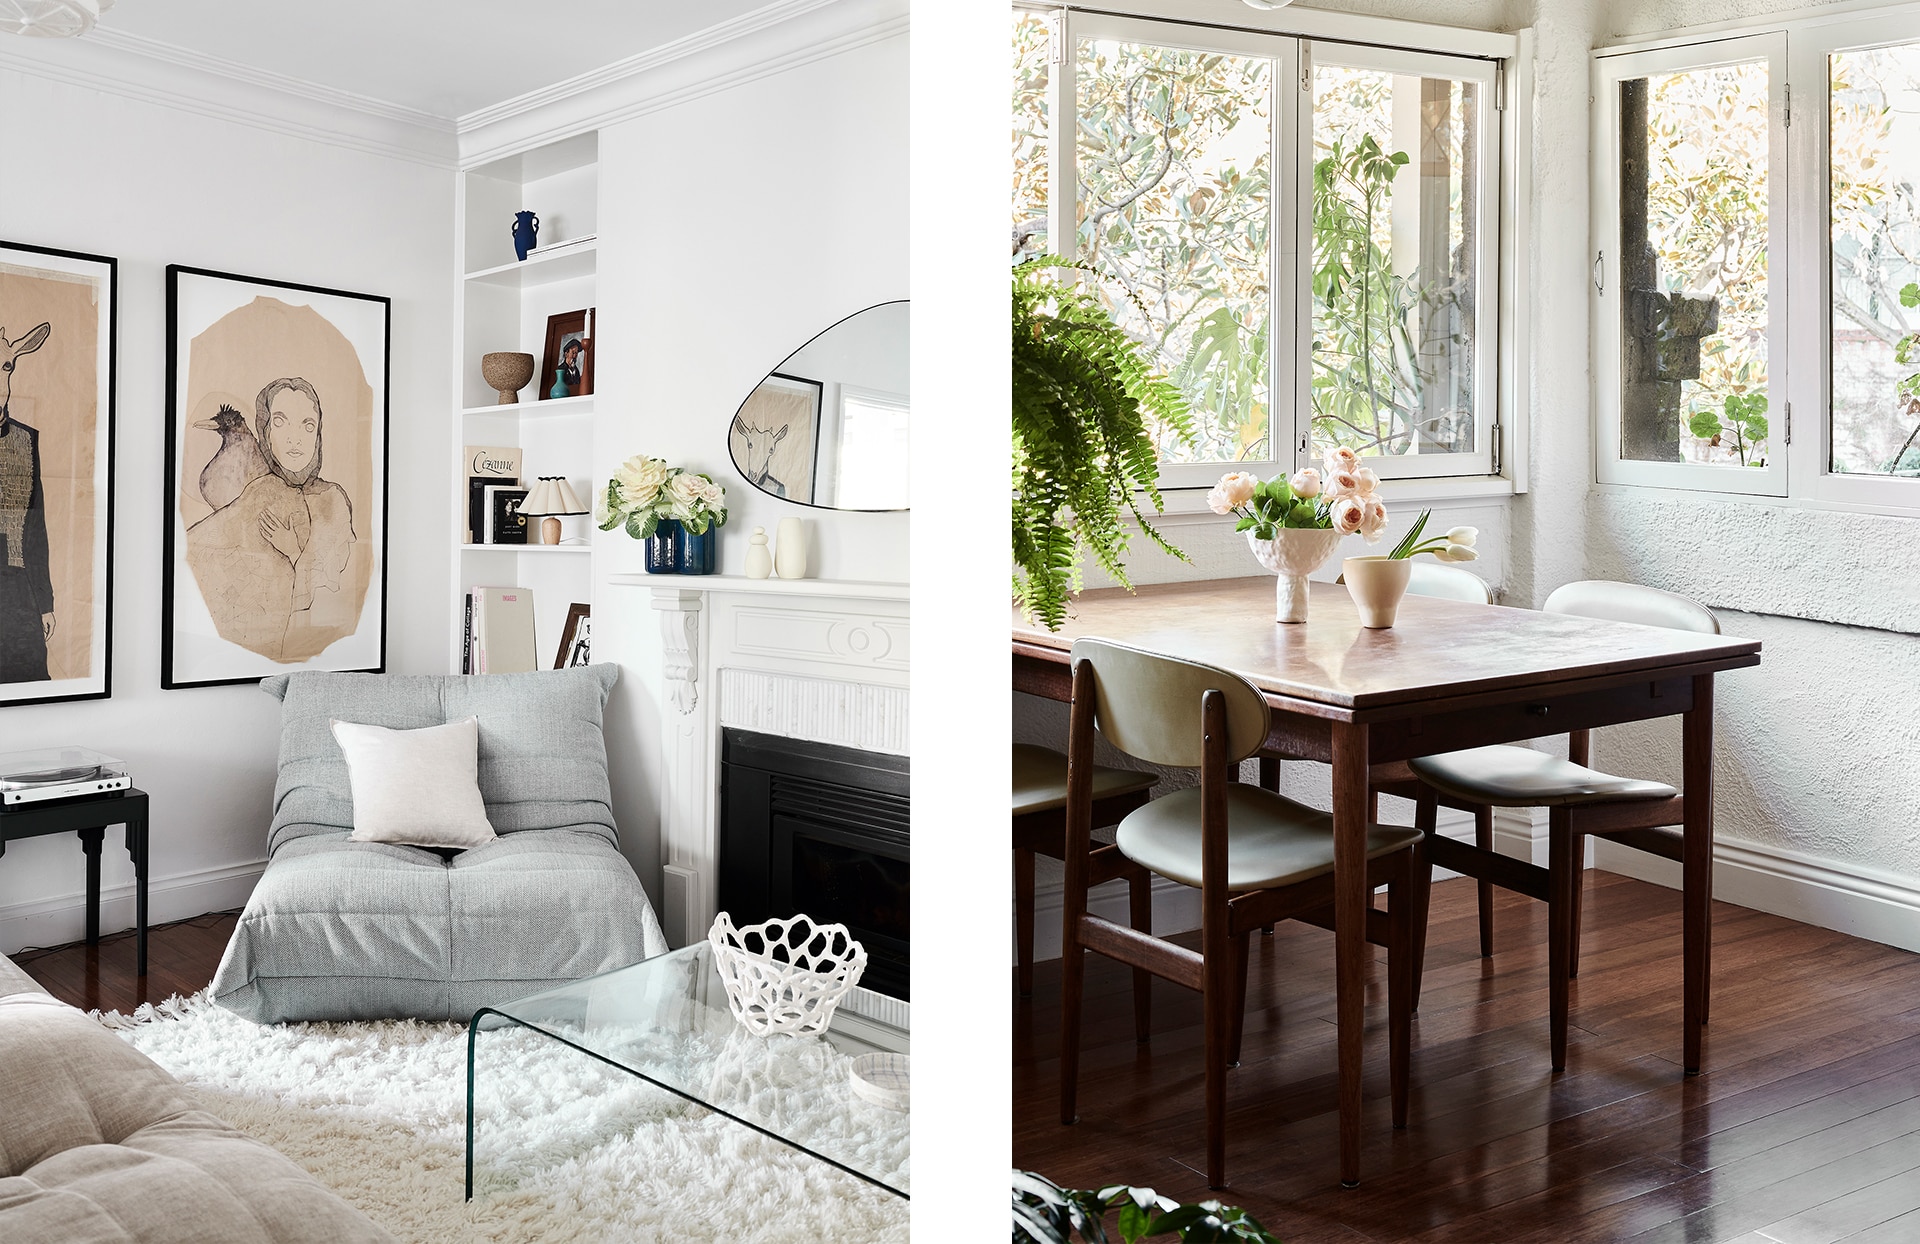 split image. right hand has corner shot of loungeroom, with grey lounge, sheridan abbotson square cushion in flax, corner of glass table and white rug. left side, dining room with table and four chairs, wood floor, trees through window.